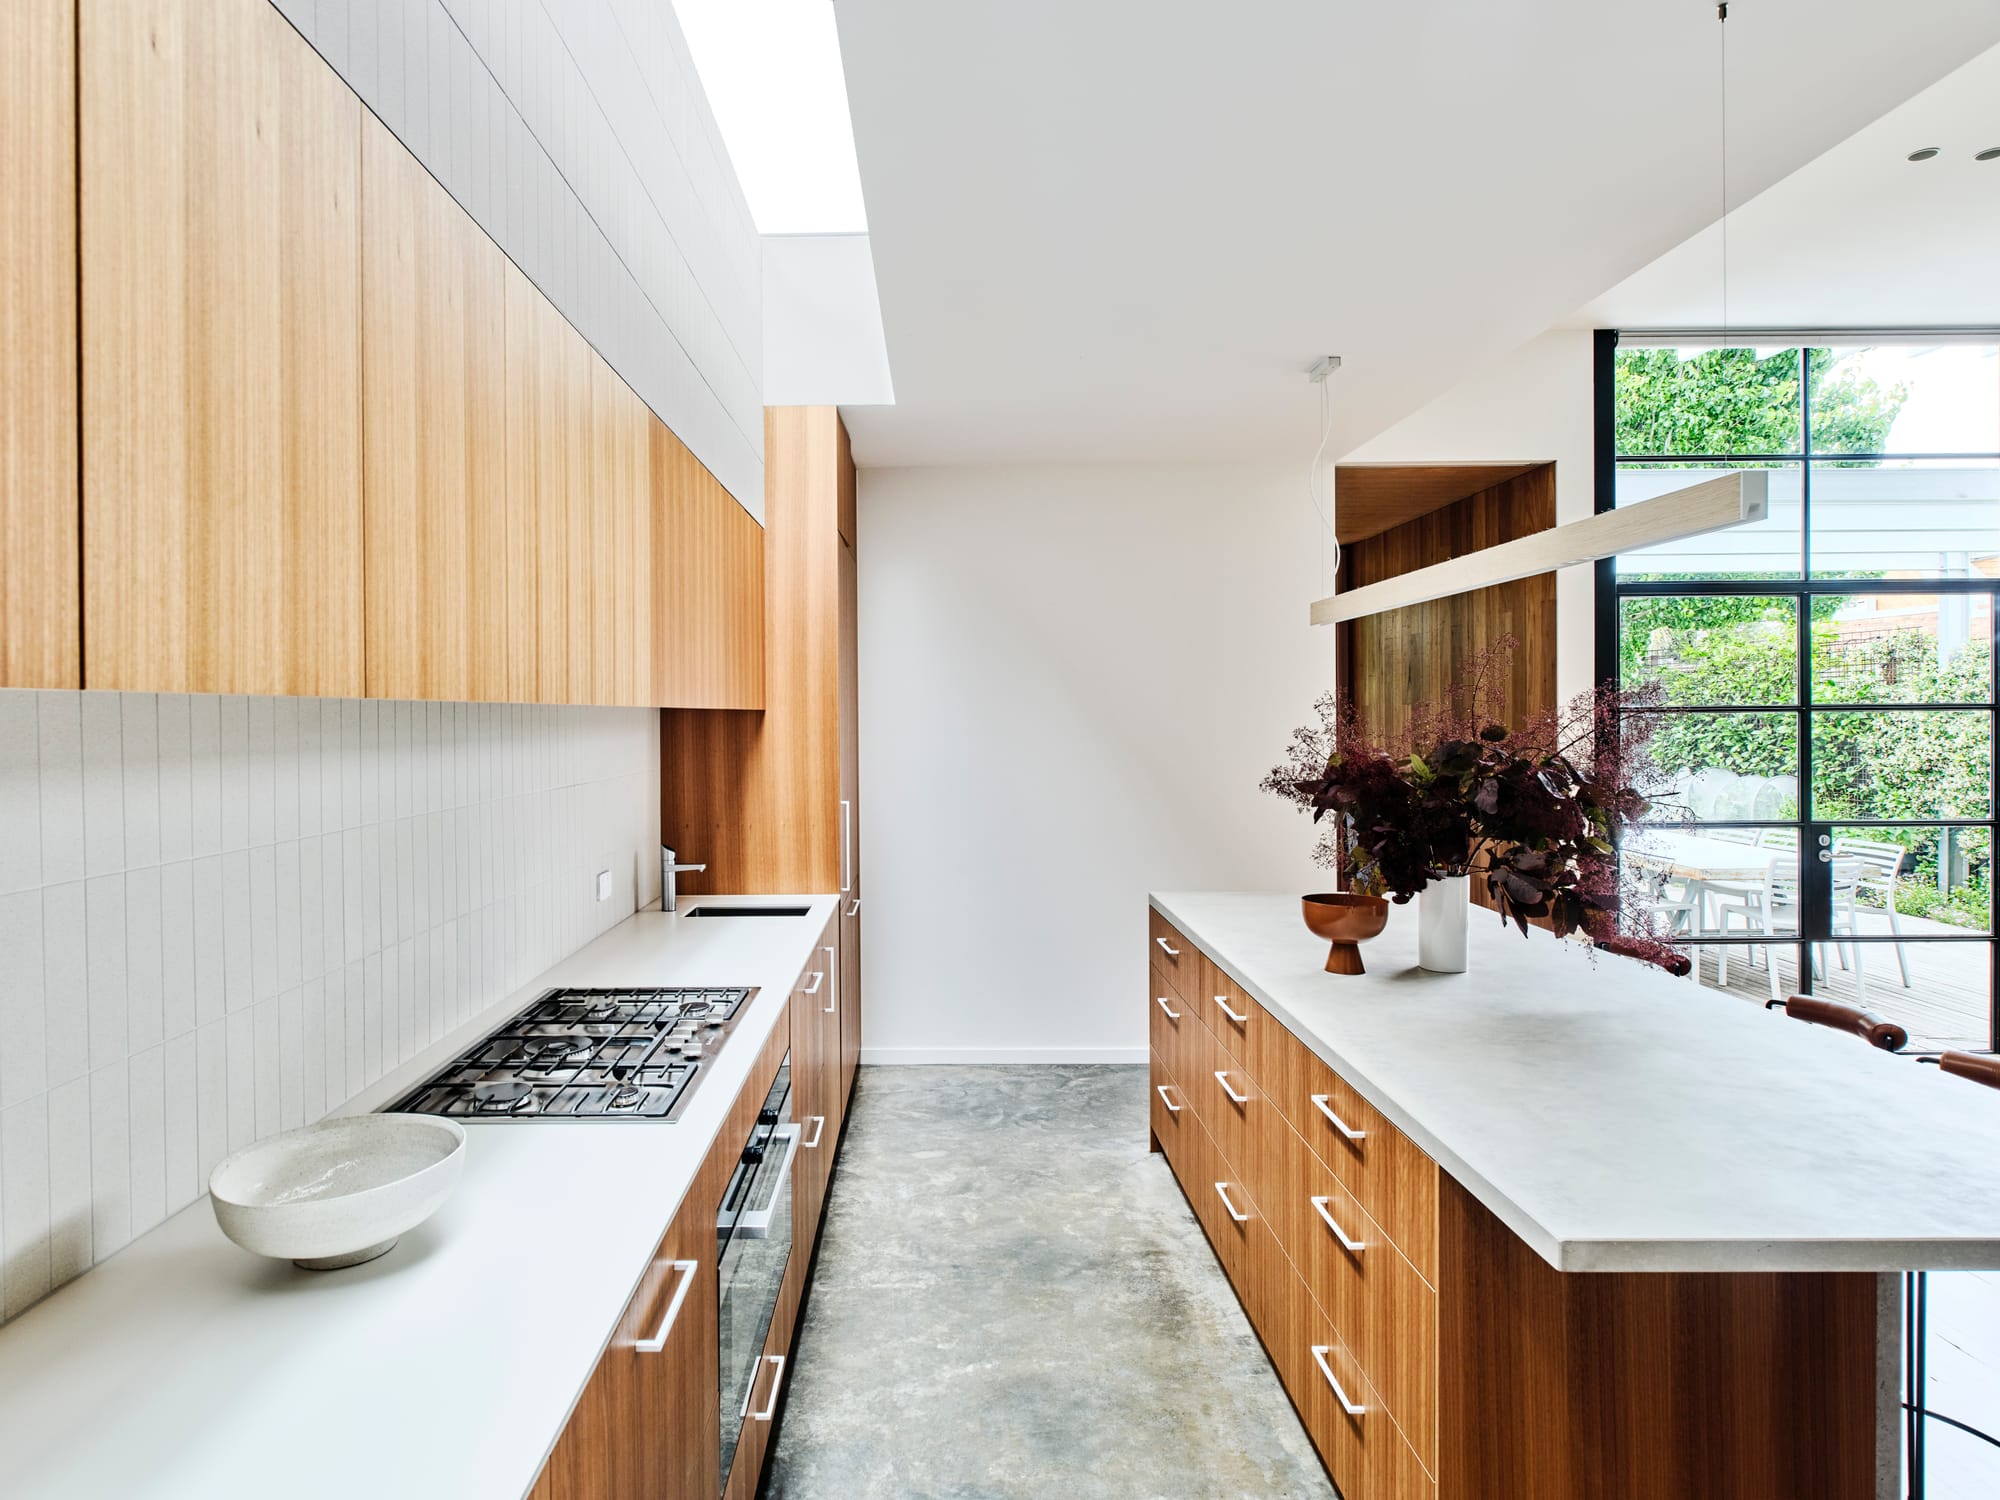 Fitzroy North Residence. Photography by Dean Bradley. Mid century modern inspired kitchen with timber cabinetry and polished concrete floors. White countertops, splashback and walls.